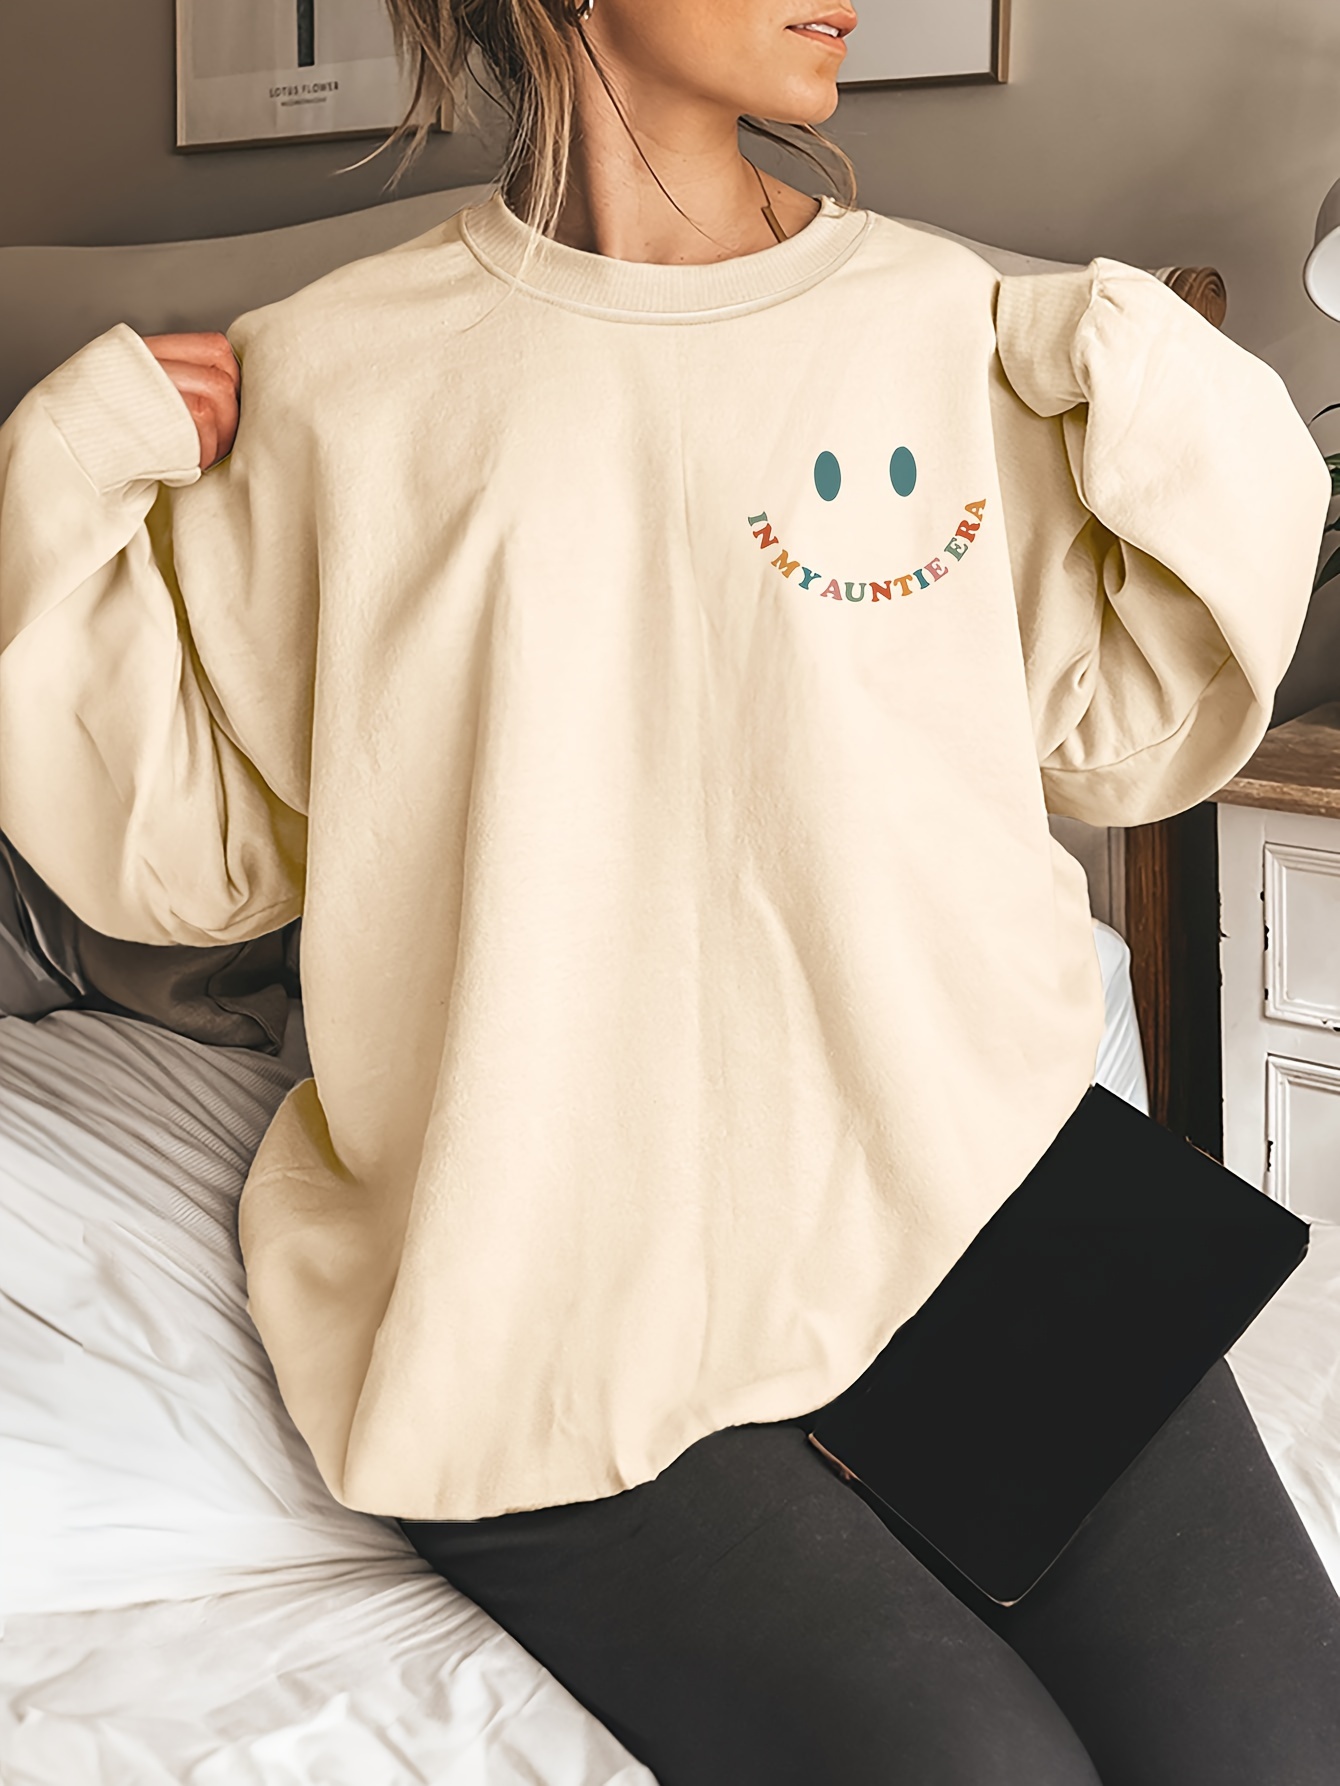 letter print pullover sweatshirt casual long sleeve crew neck sweatshirt for fall winter womens clothing details 10